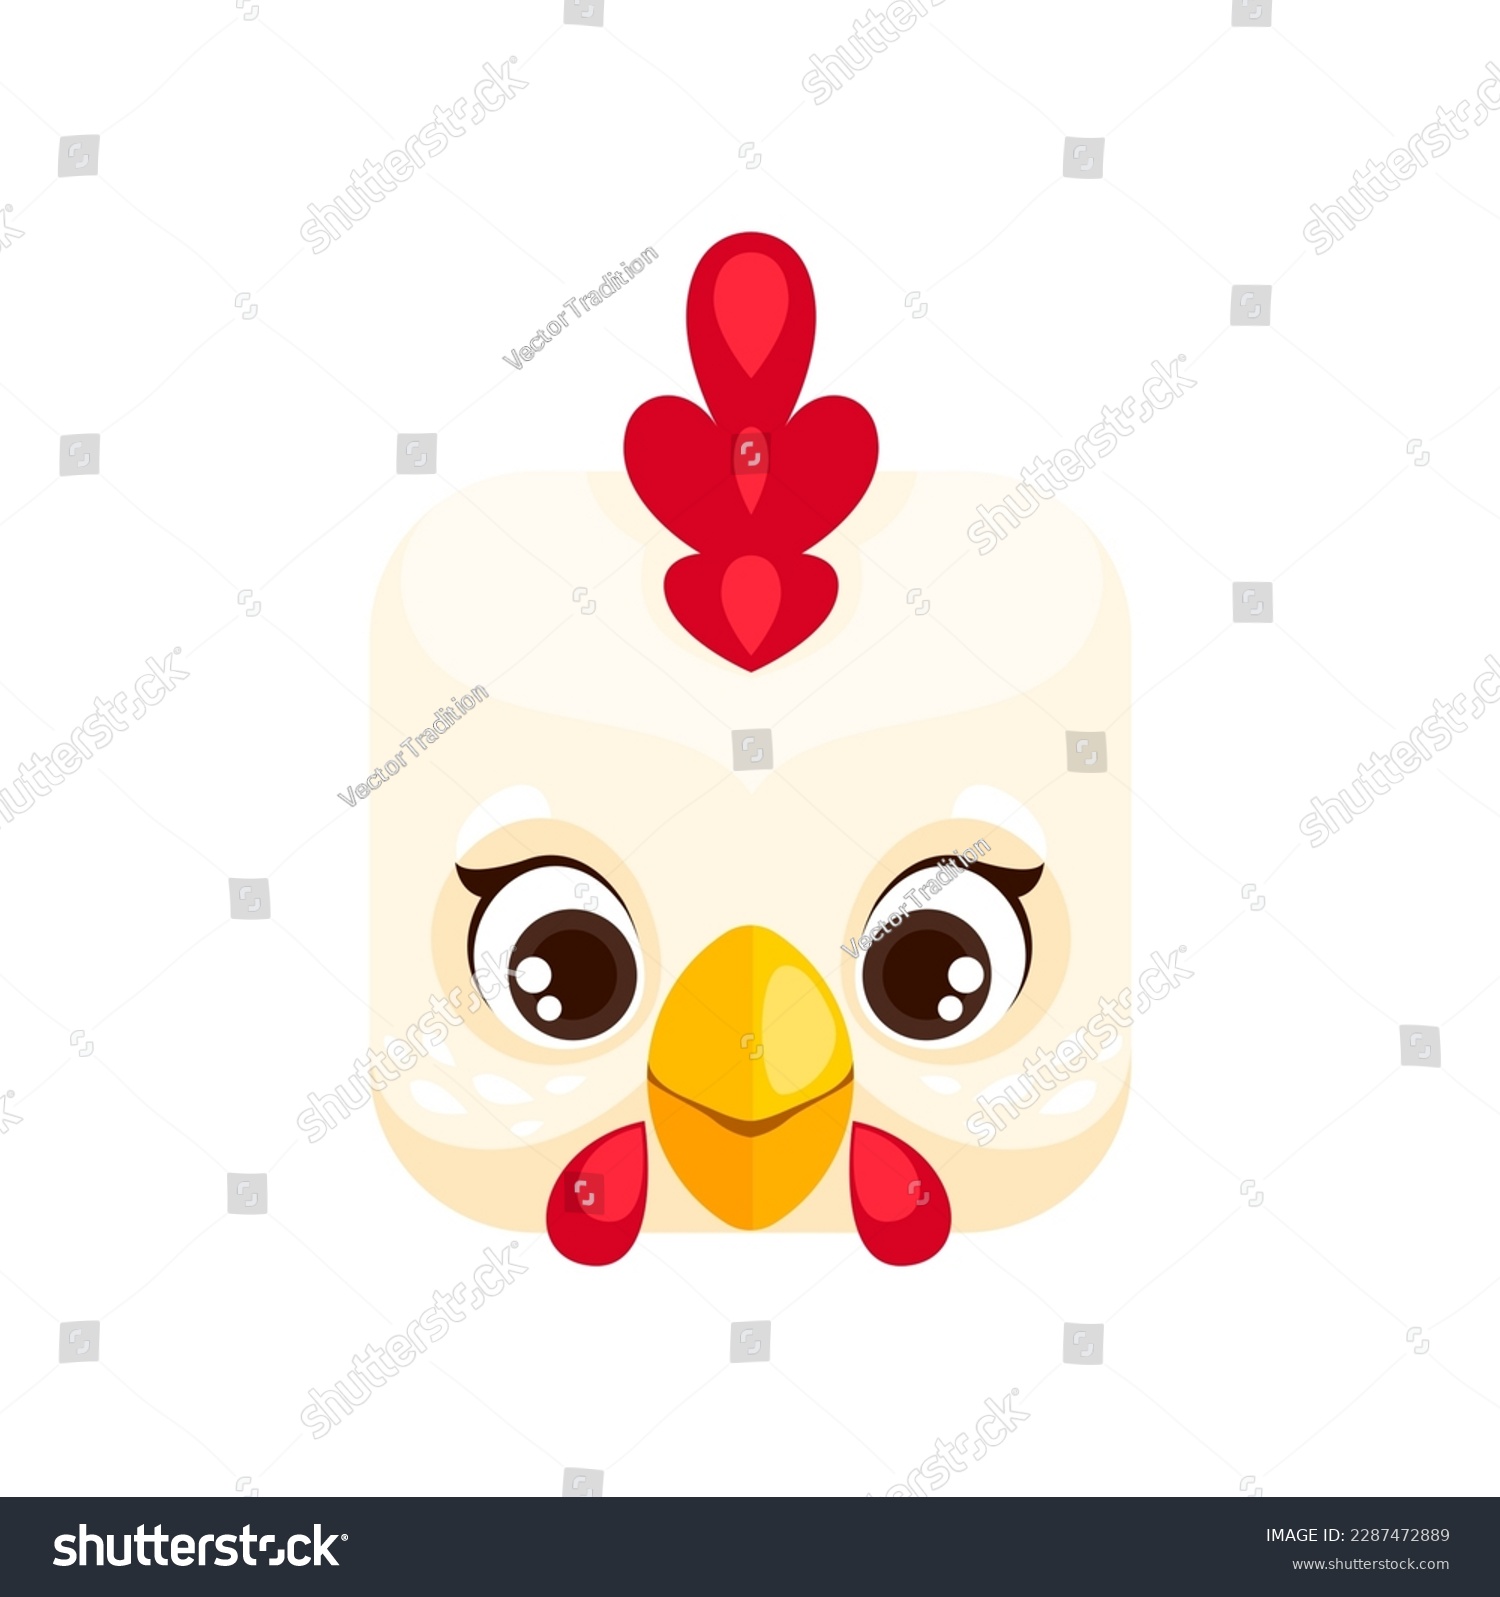 SVG of Cartoon rooster kawaii square animal face. Vector farm bird, cock character portrait with eyes and beak. Isolated app button, icon, graphic design element svg